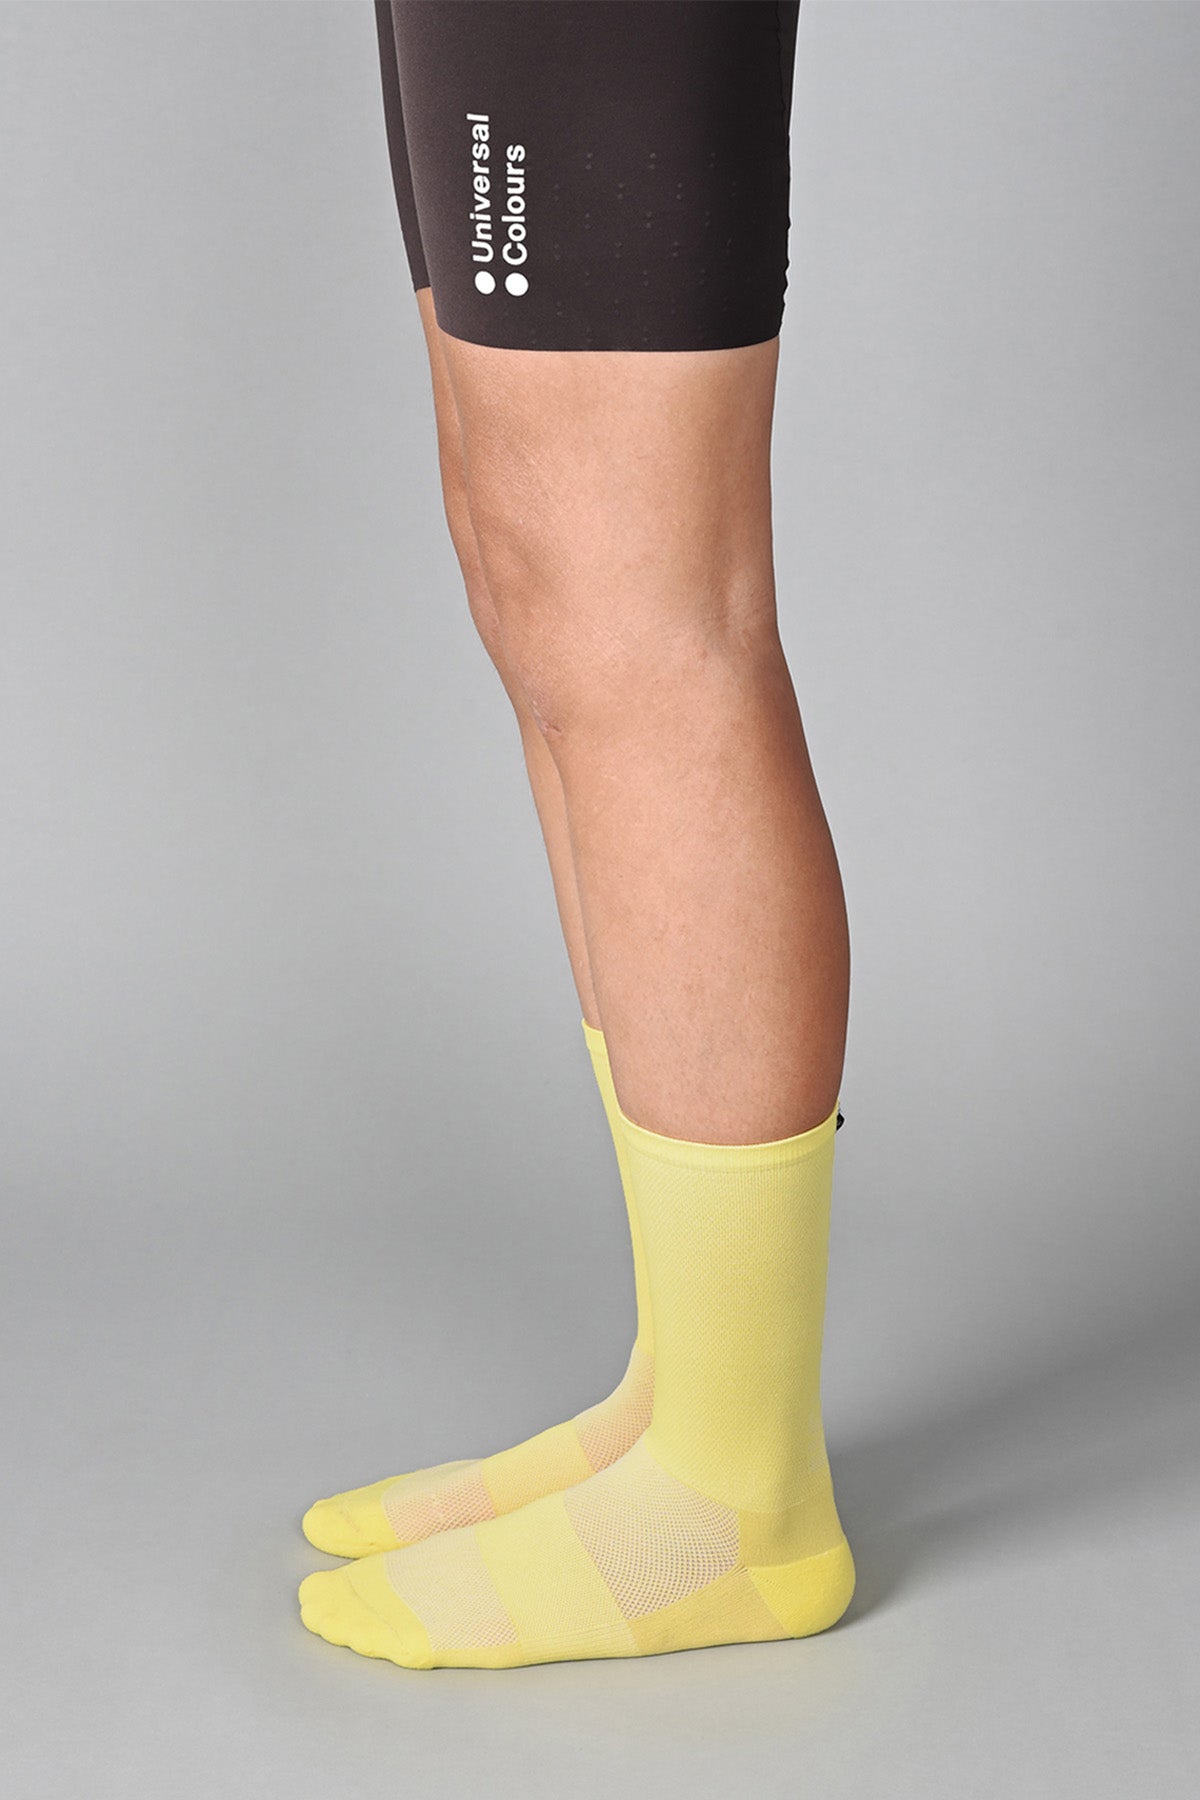 STEALTH - CANARY SIDE | BEST CYCLING SOCKS